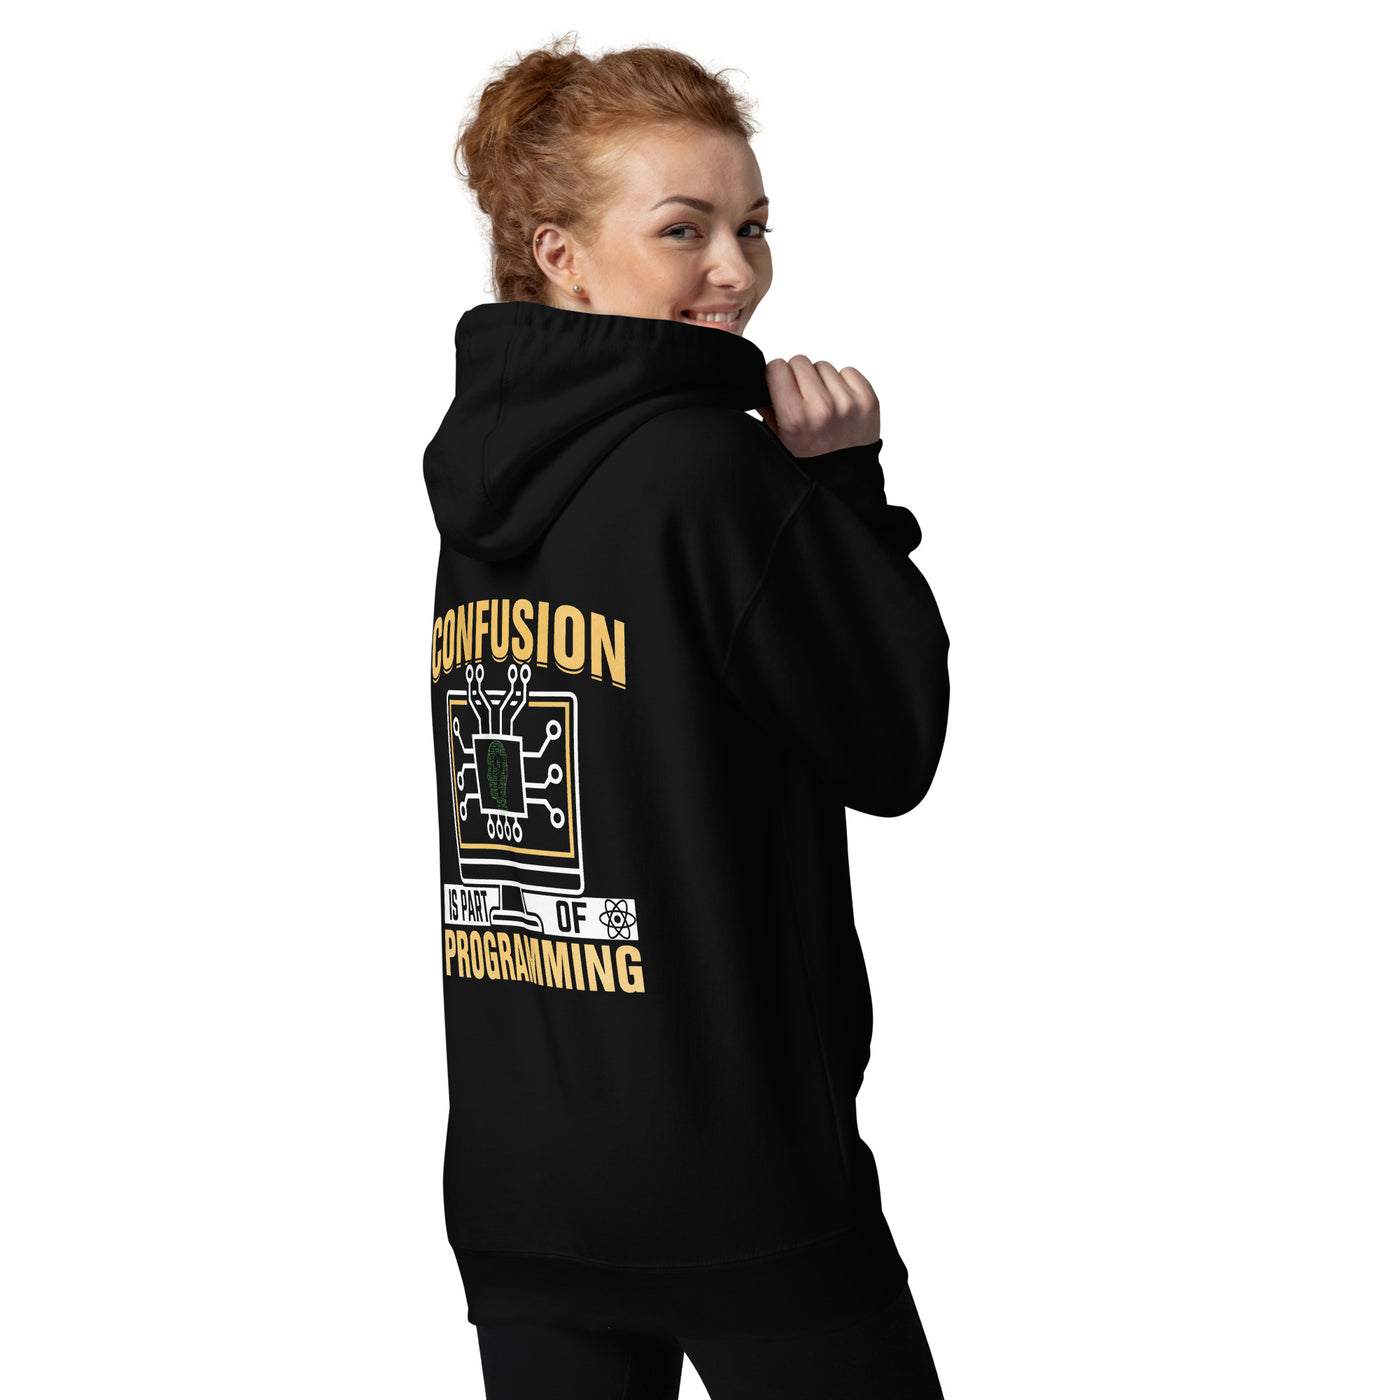 Confusion is Part of Programming Unisex Hoodie  ( Back Print )